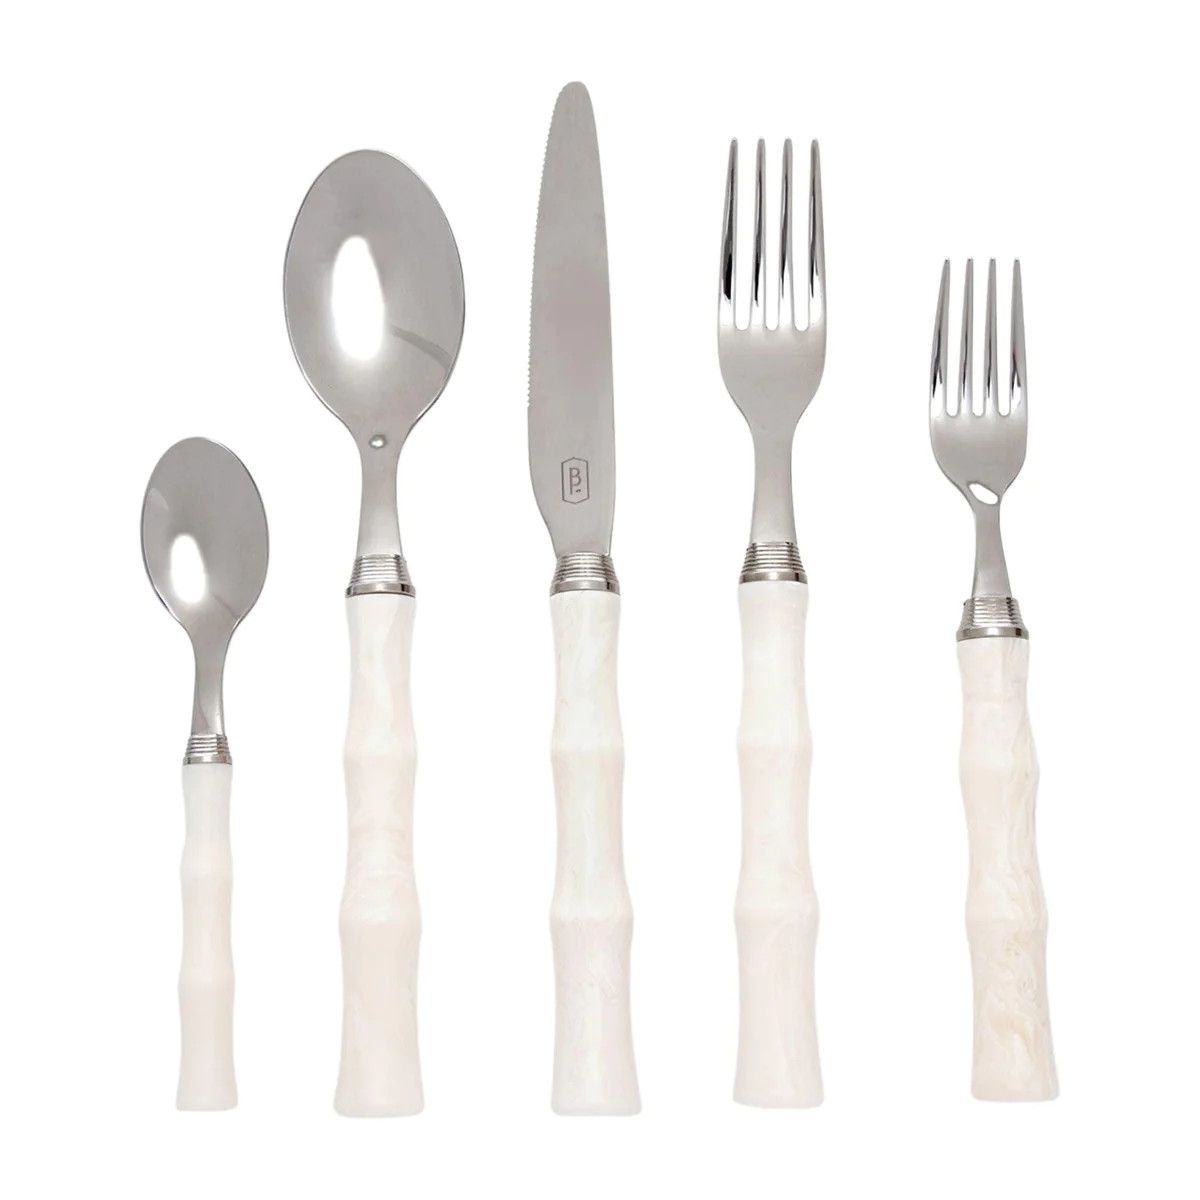 Stainless Steel and Faux Ivory Five Piece Flatware Set | The Well Appointed House, LLC